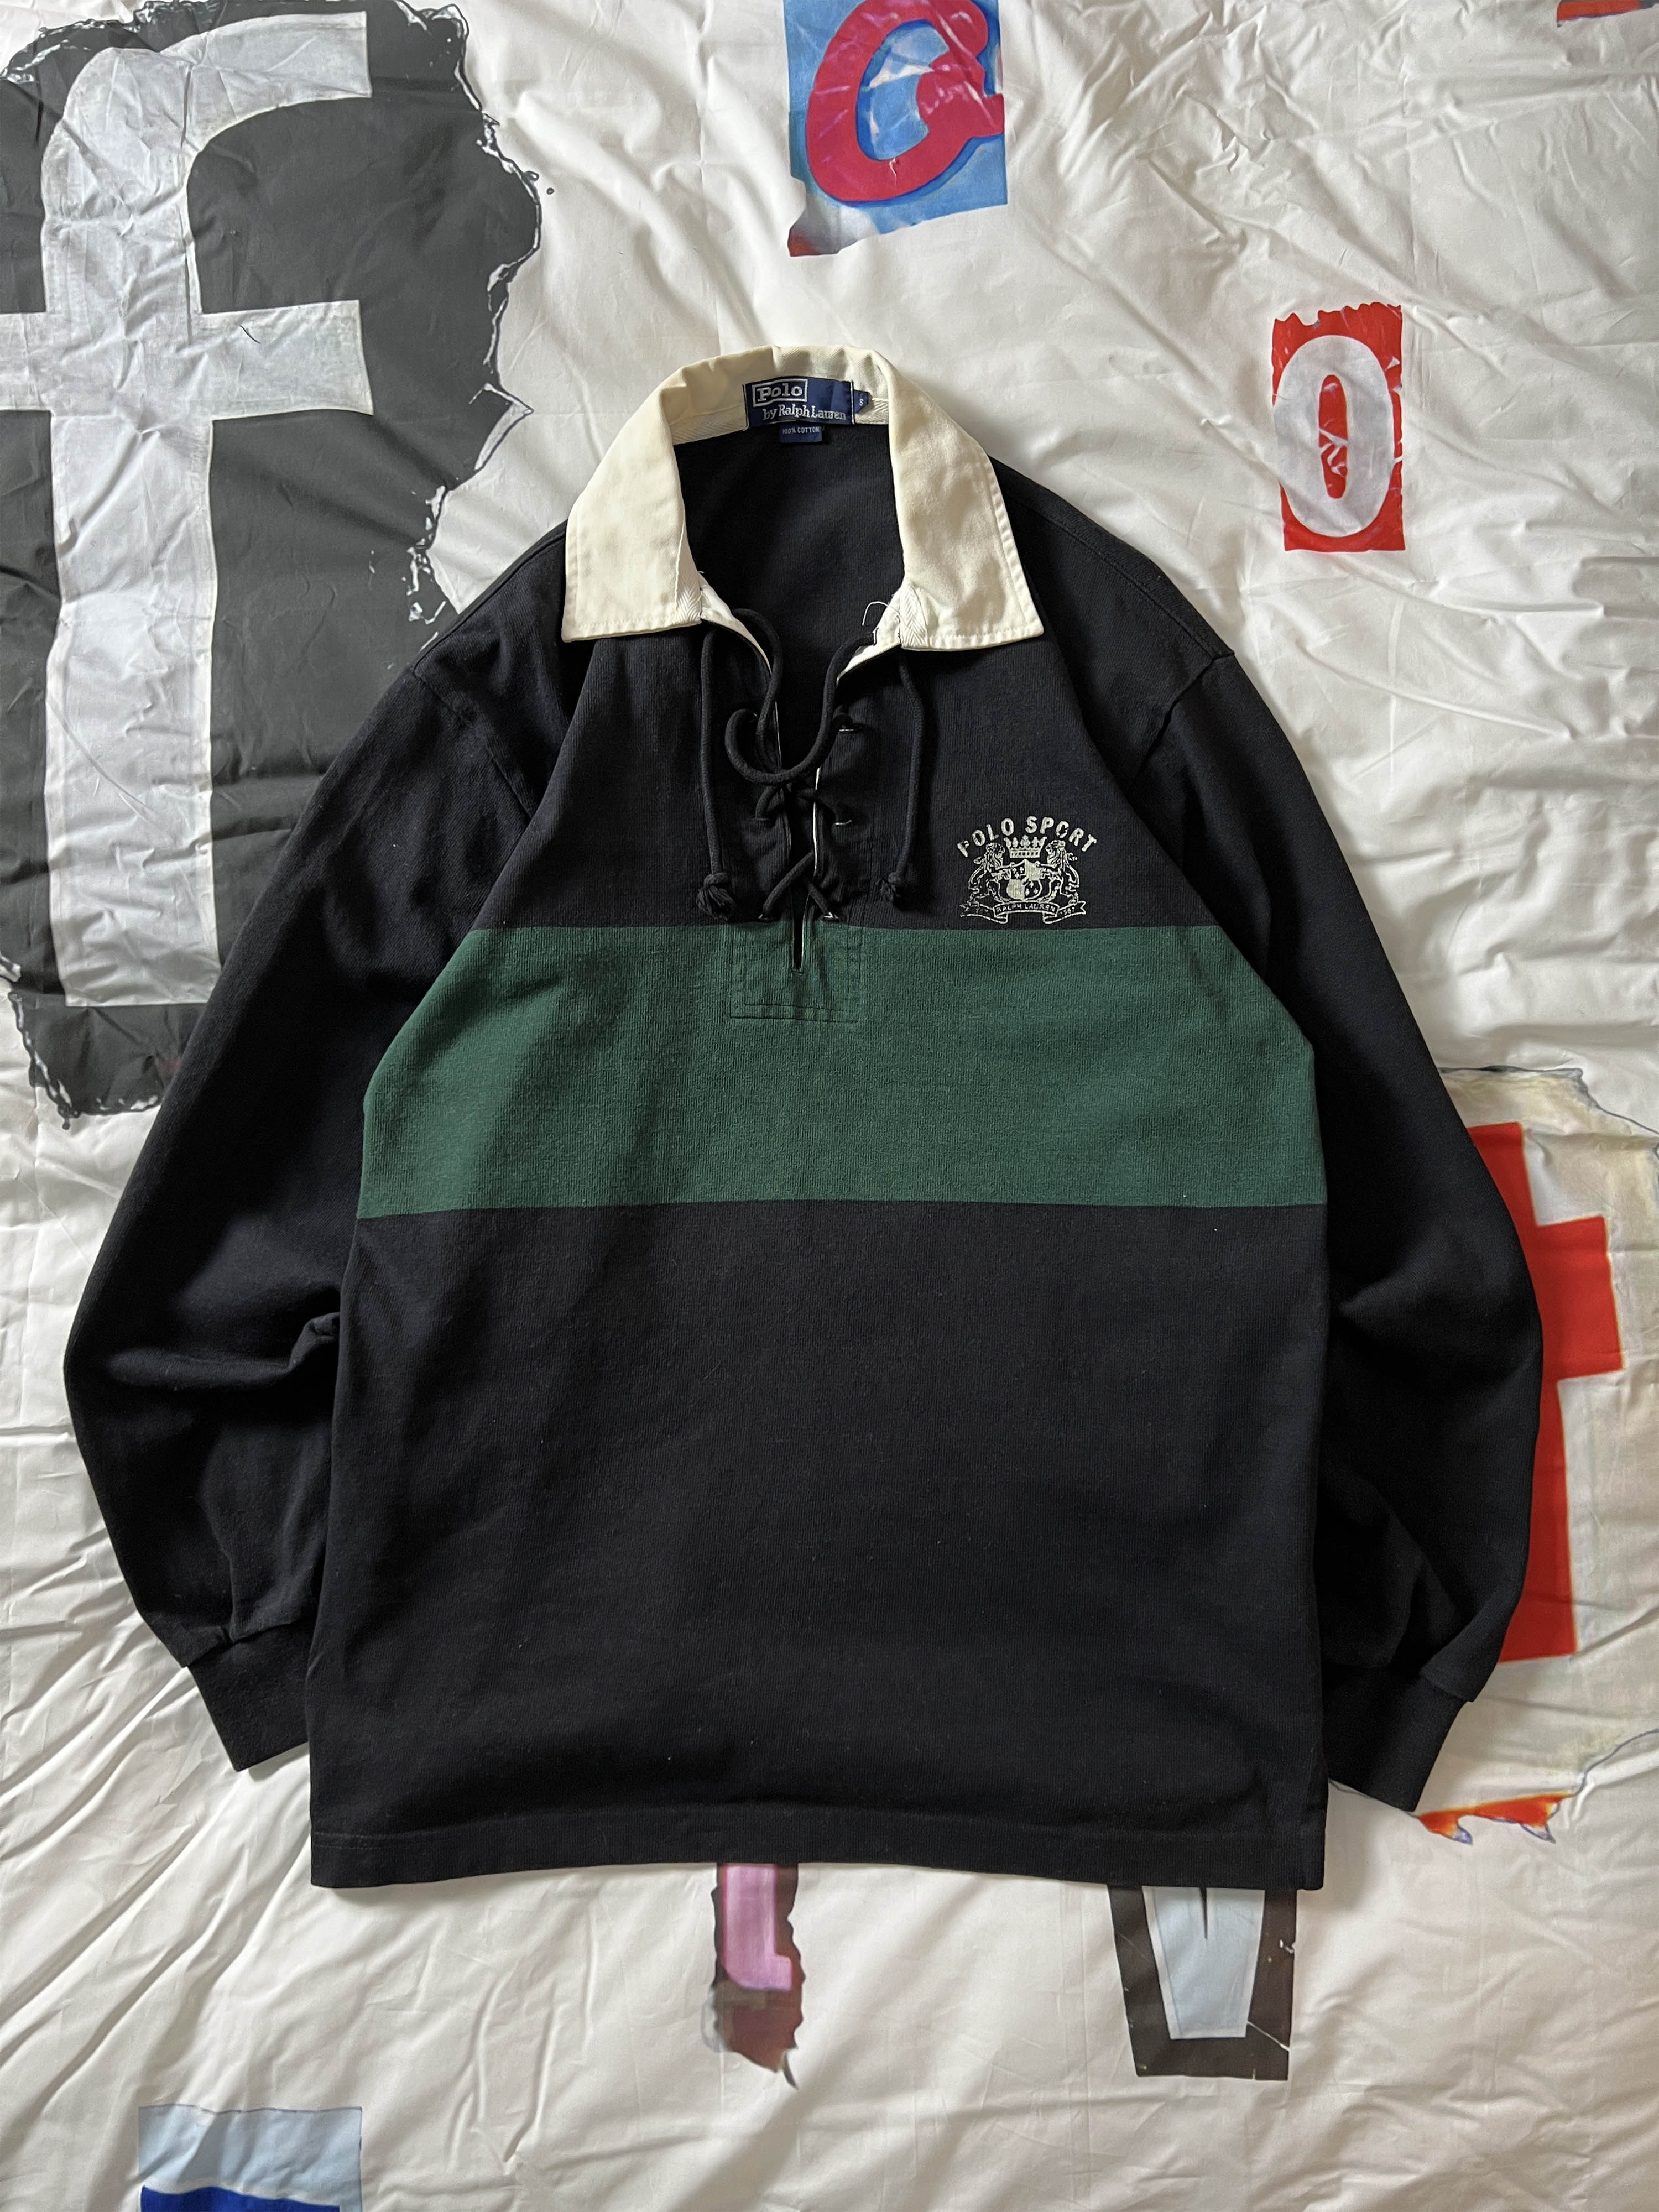 Polo by Ralph Lauren pullover rugby shirts